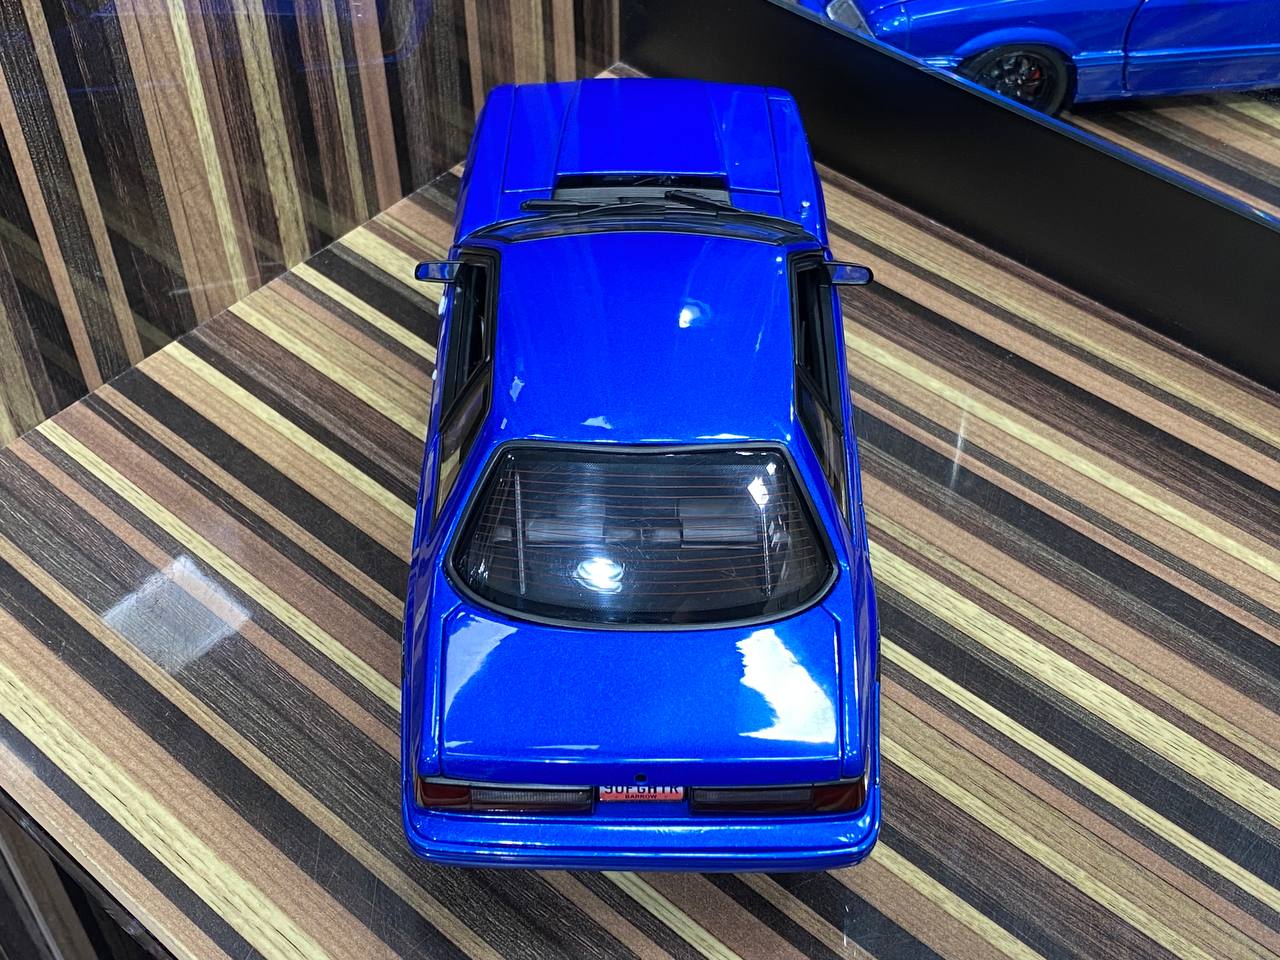 1/18 Ford Mustang 1990 blue by GMP Model Car|Sold in Dturman.com Dubai UAE.